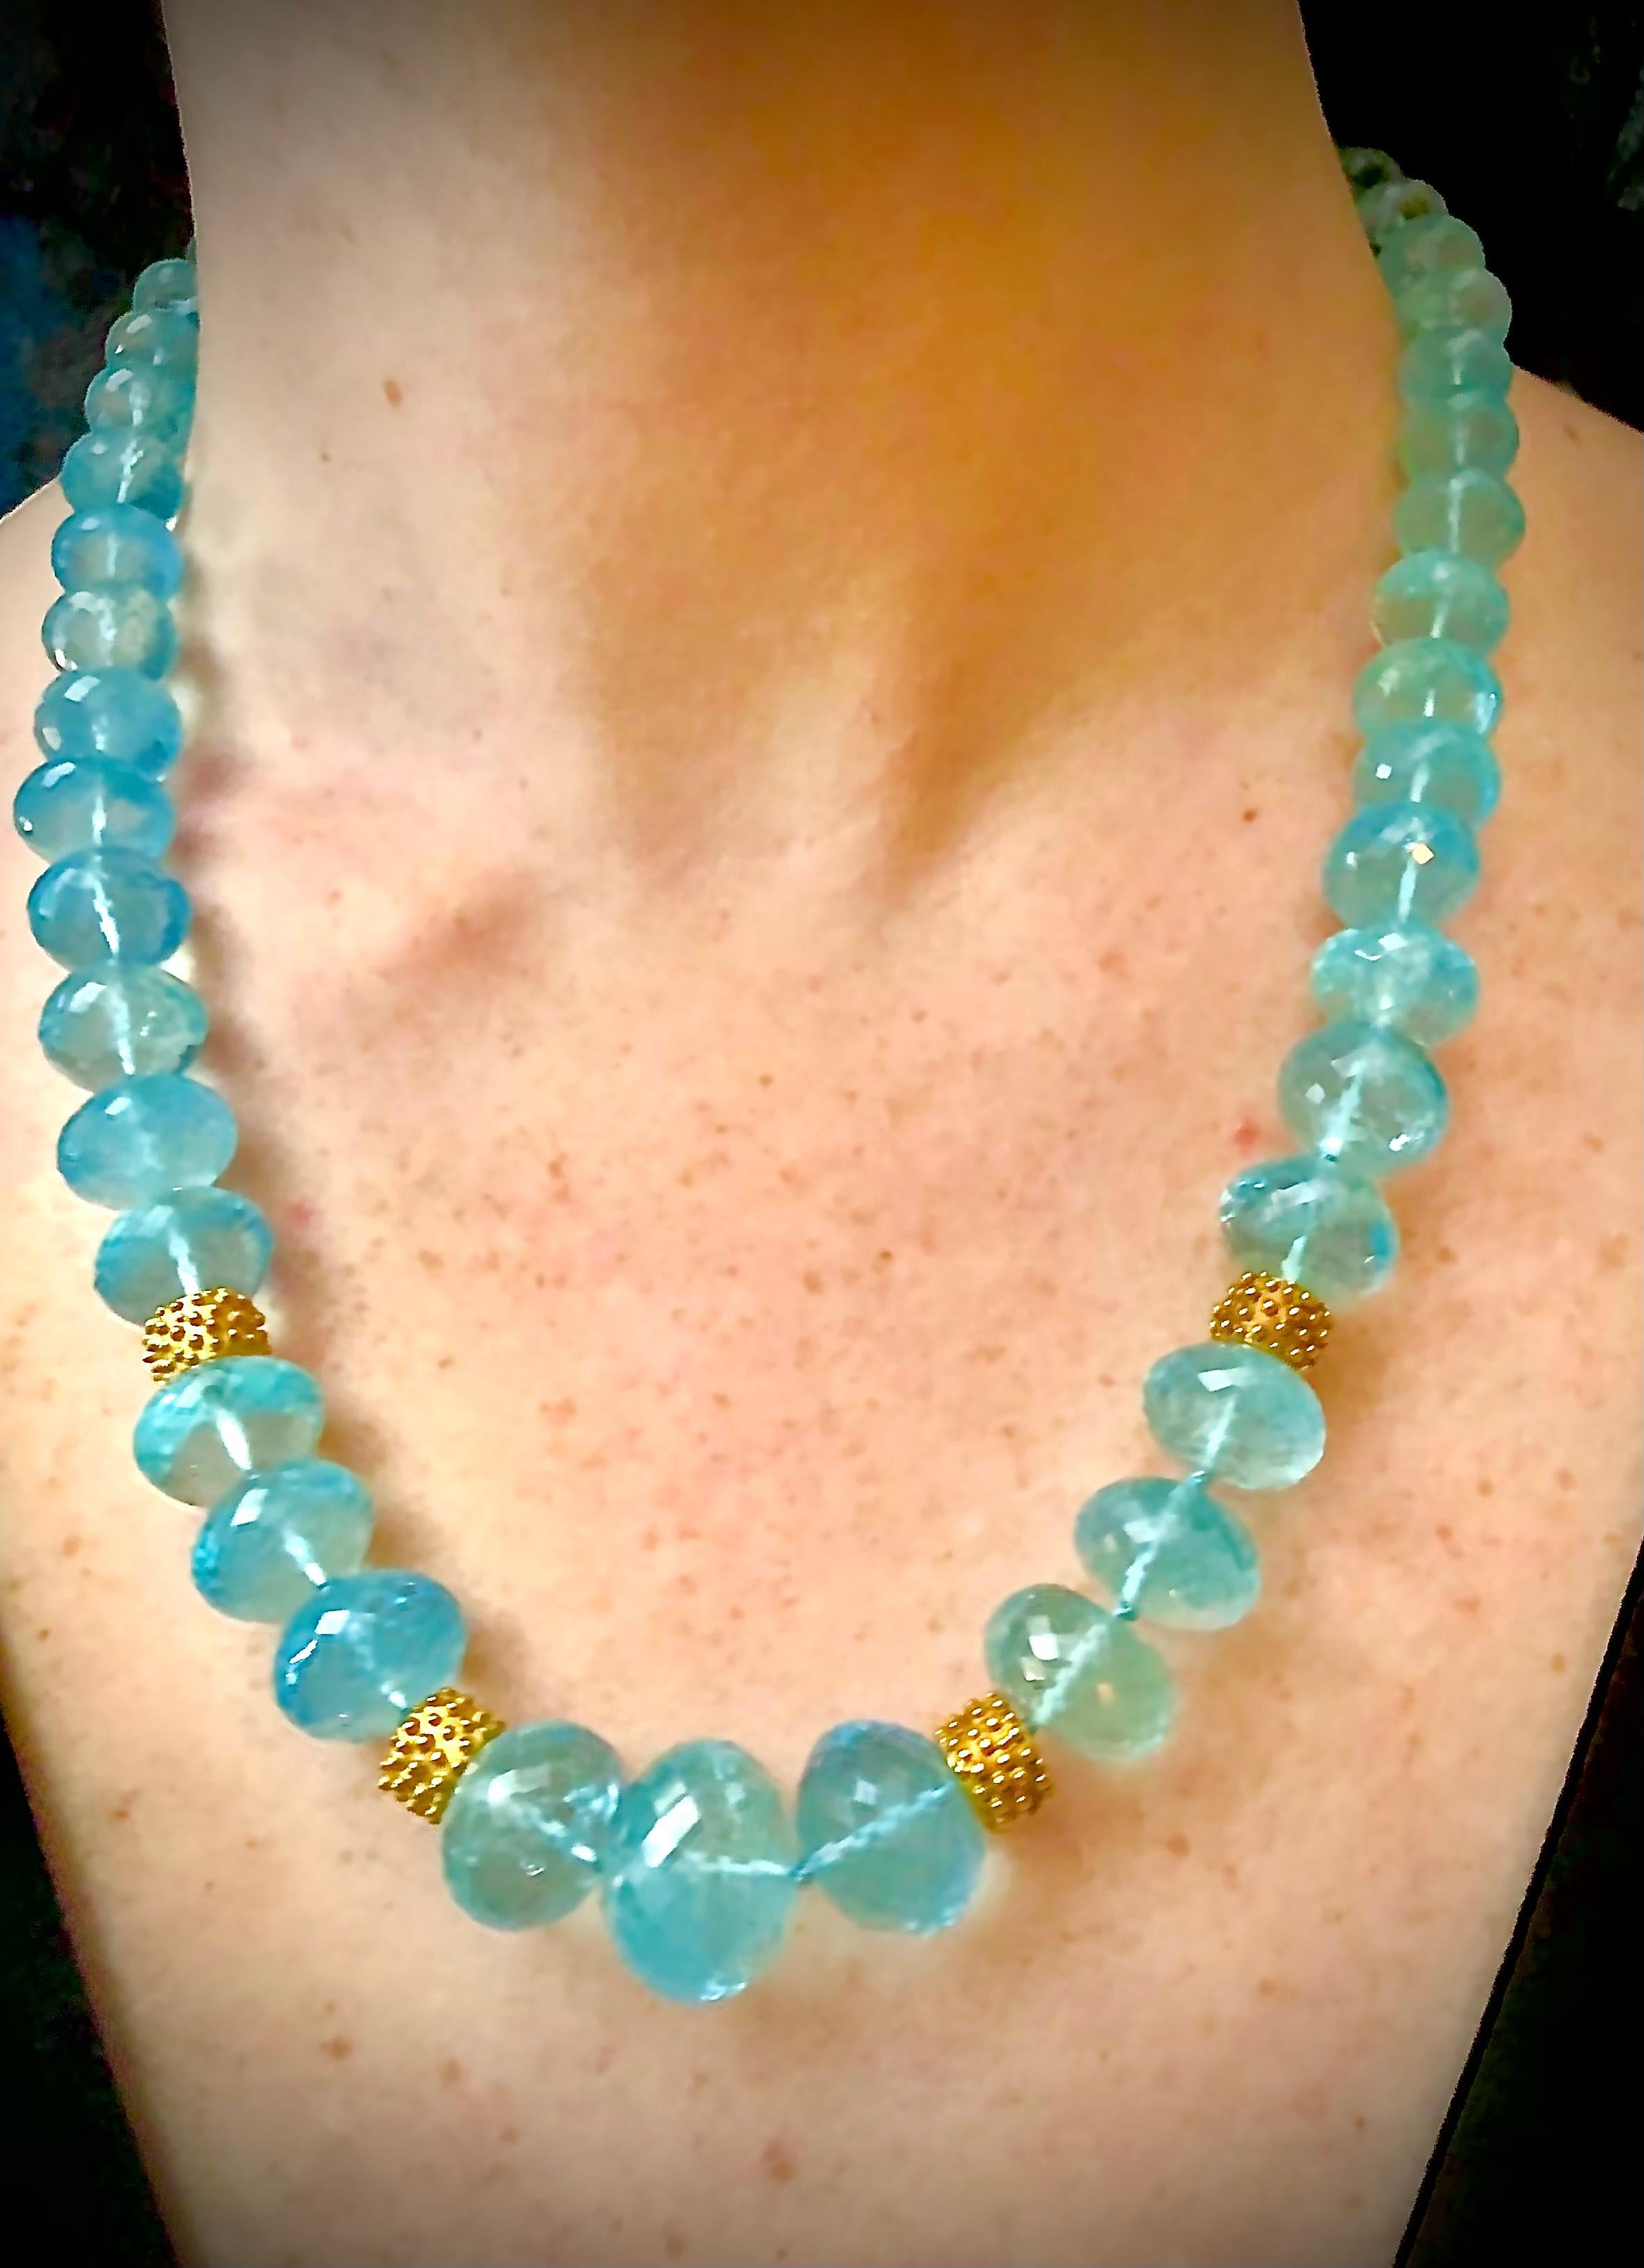 Impressive and luxurious long single strand necklace of large richly colored aquamarine sparkling faceted rondelles ranging in size from 18.12mm to 8.24mm. The piece is accented by four heavy 14kt yellow gold deeply textured large custom made